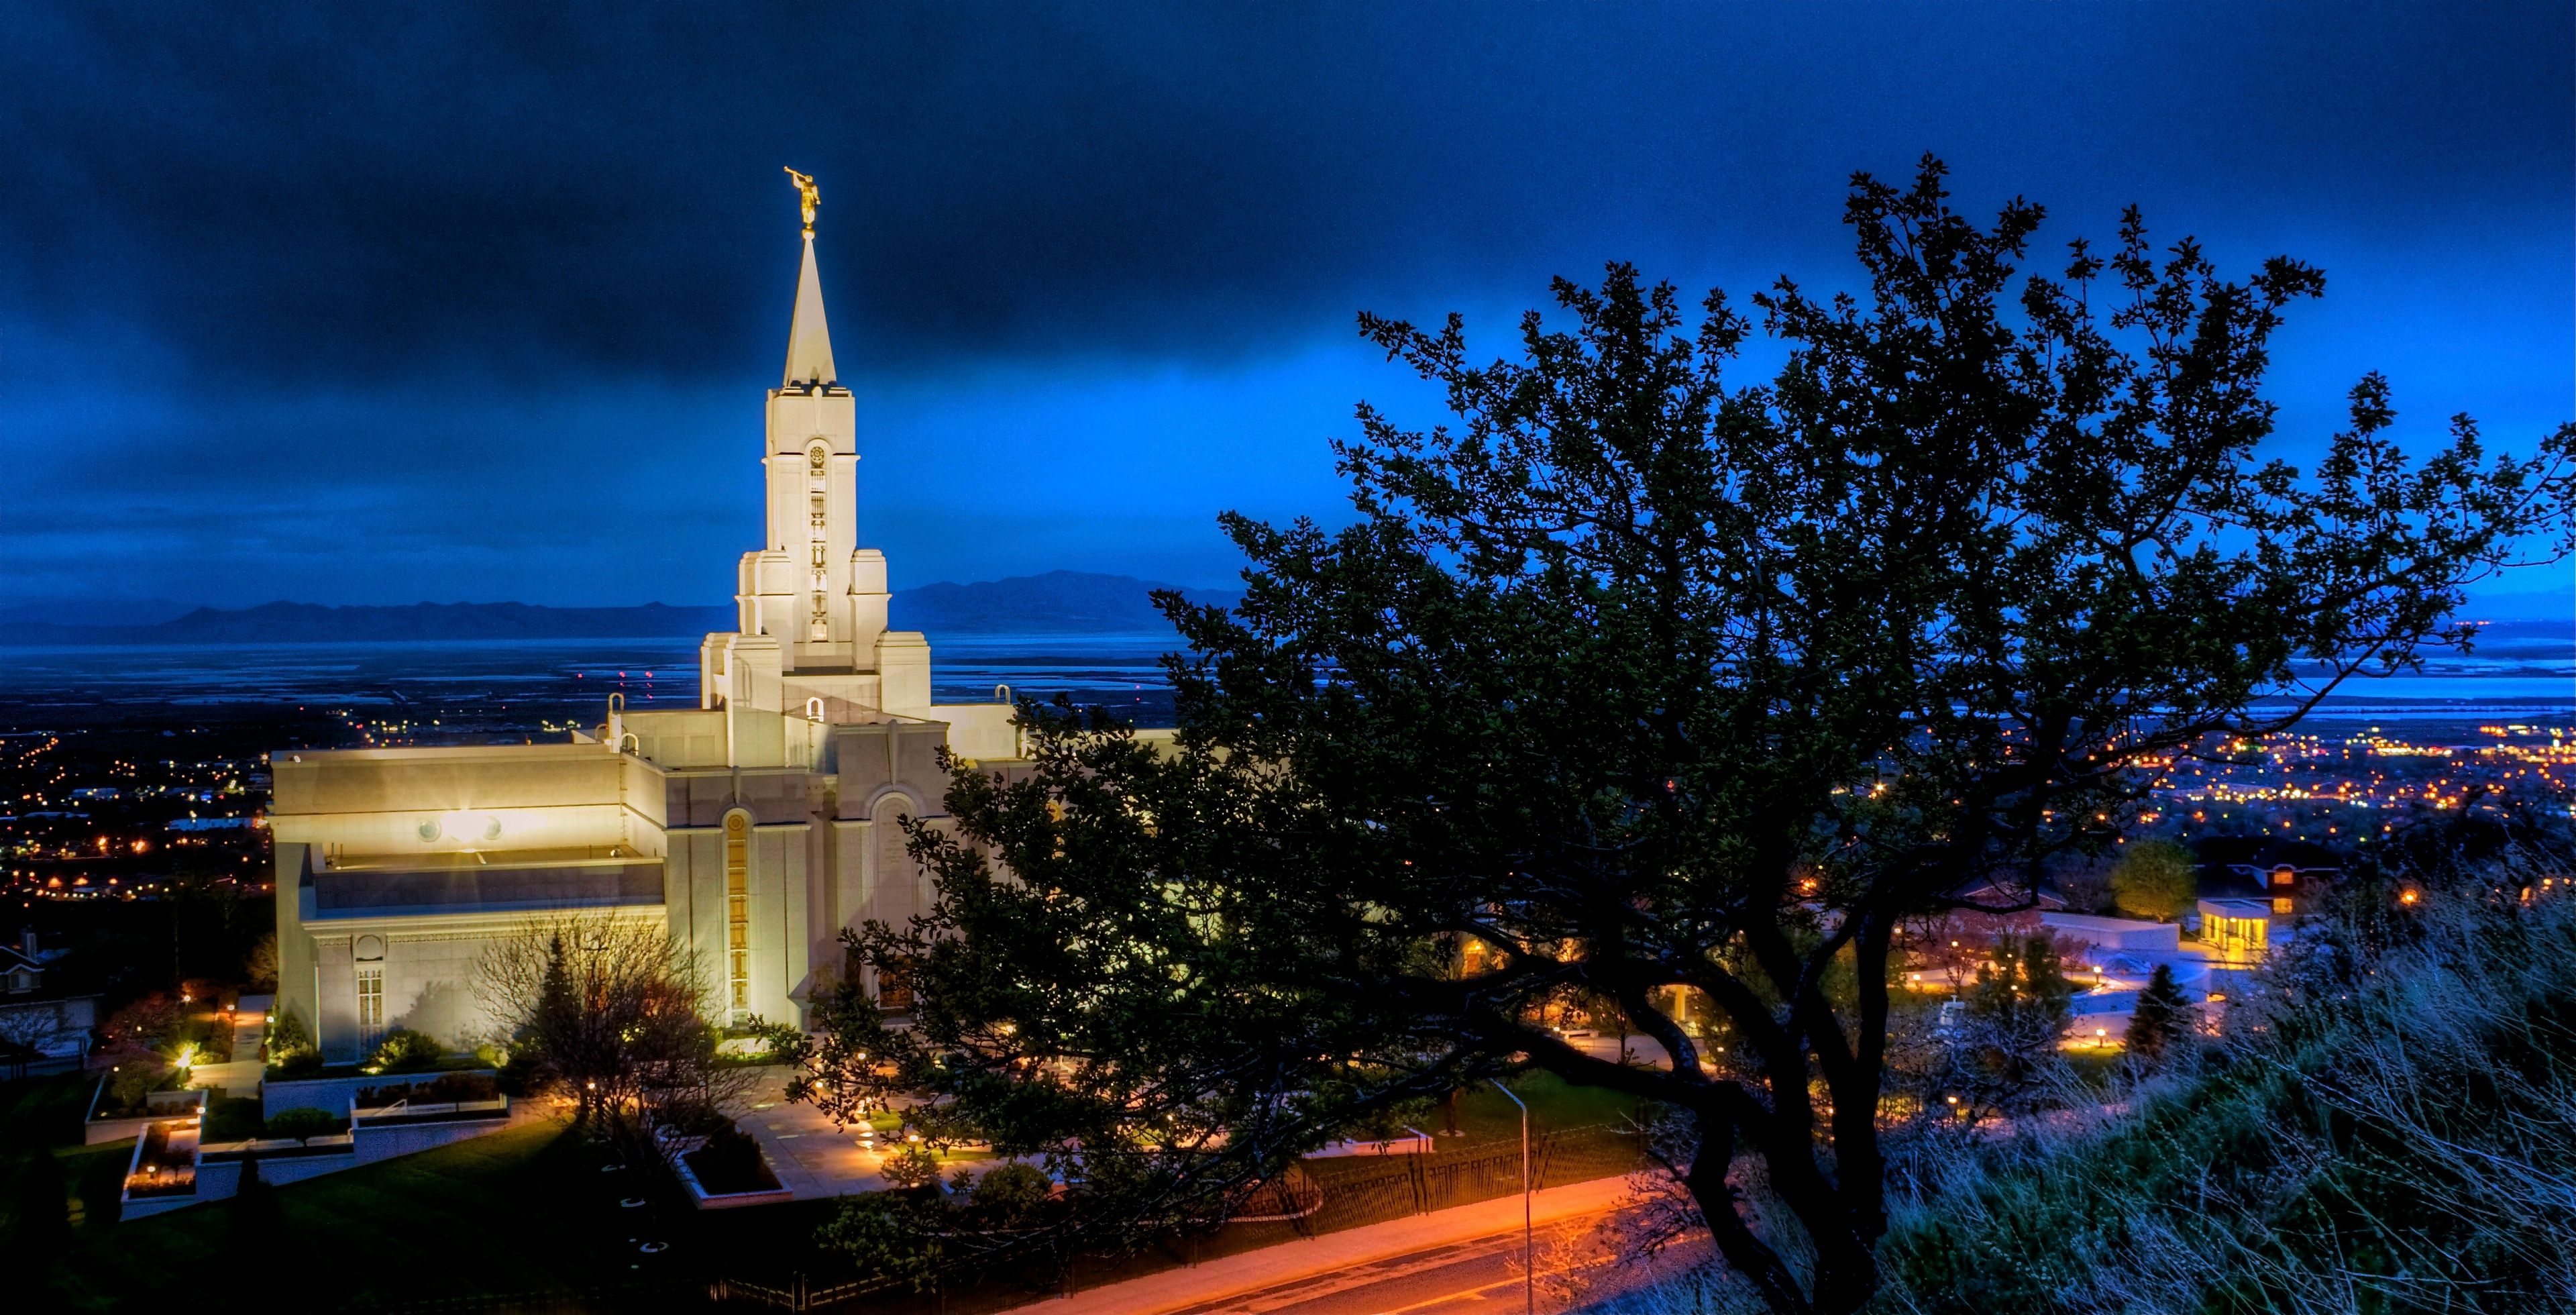 A night view of the Bountiful Utah Temple and grounds.  